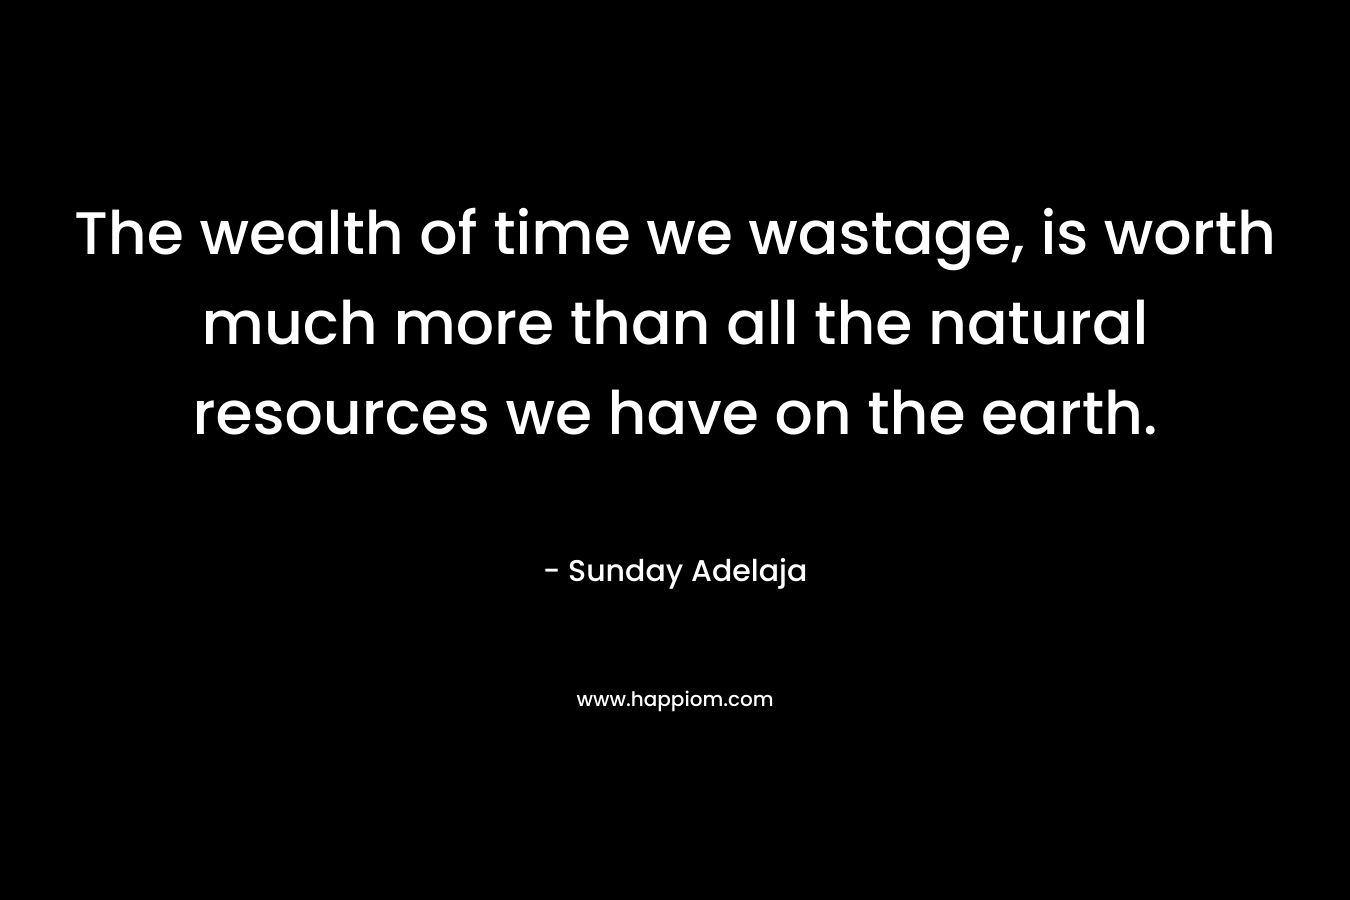 The wealth of time we wastage, is worth much more than all the natural resources we have on the earth.